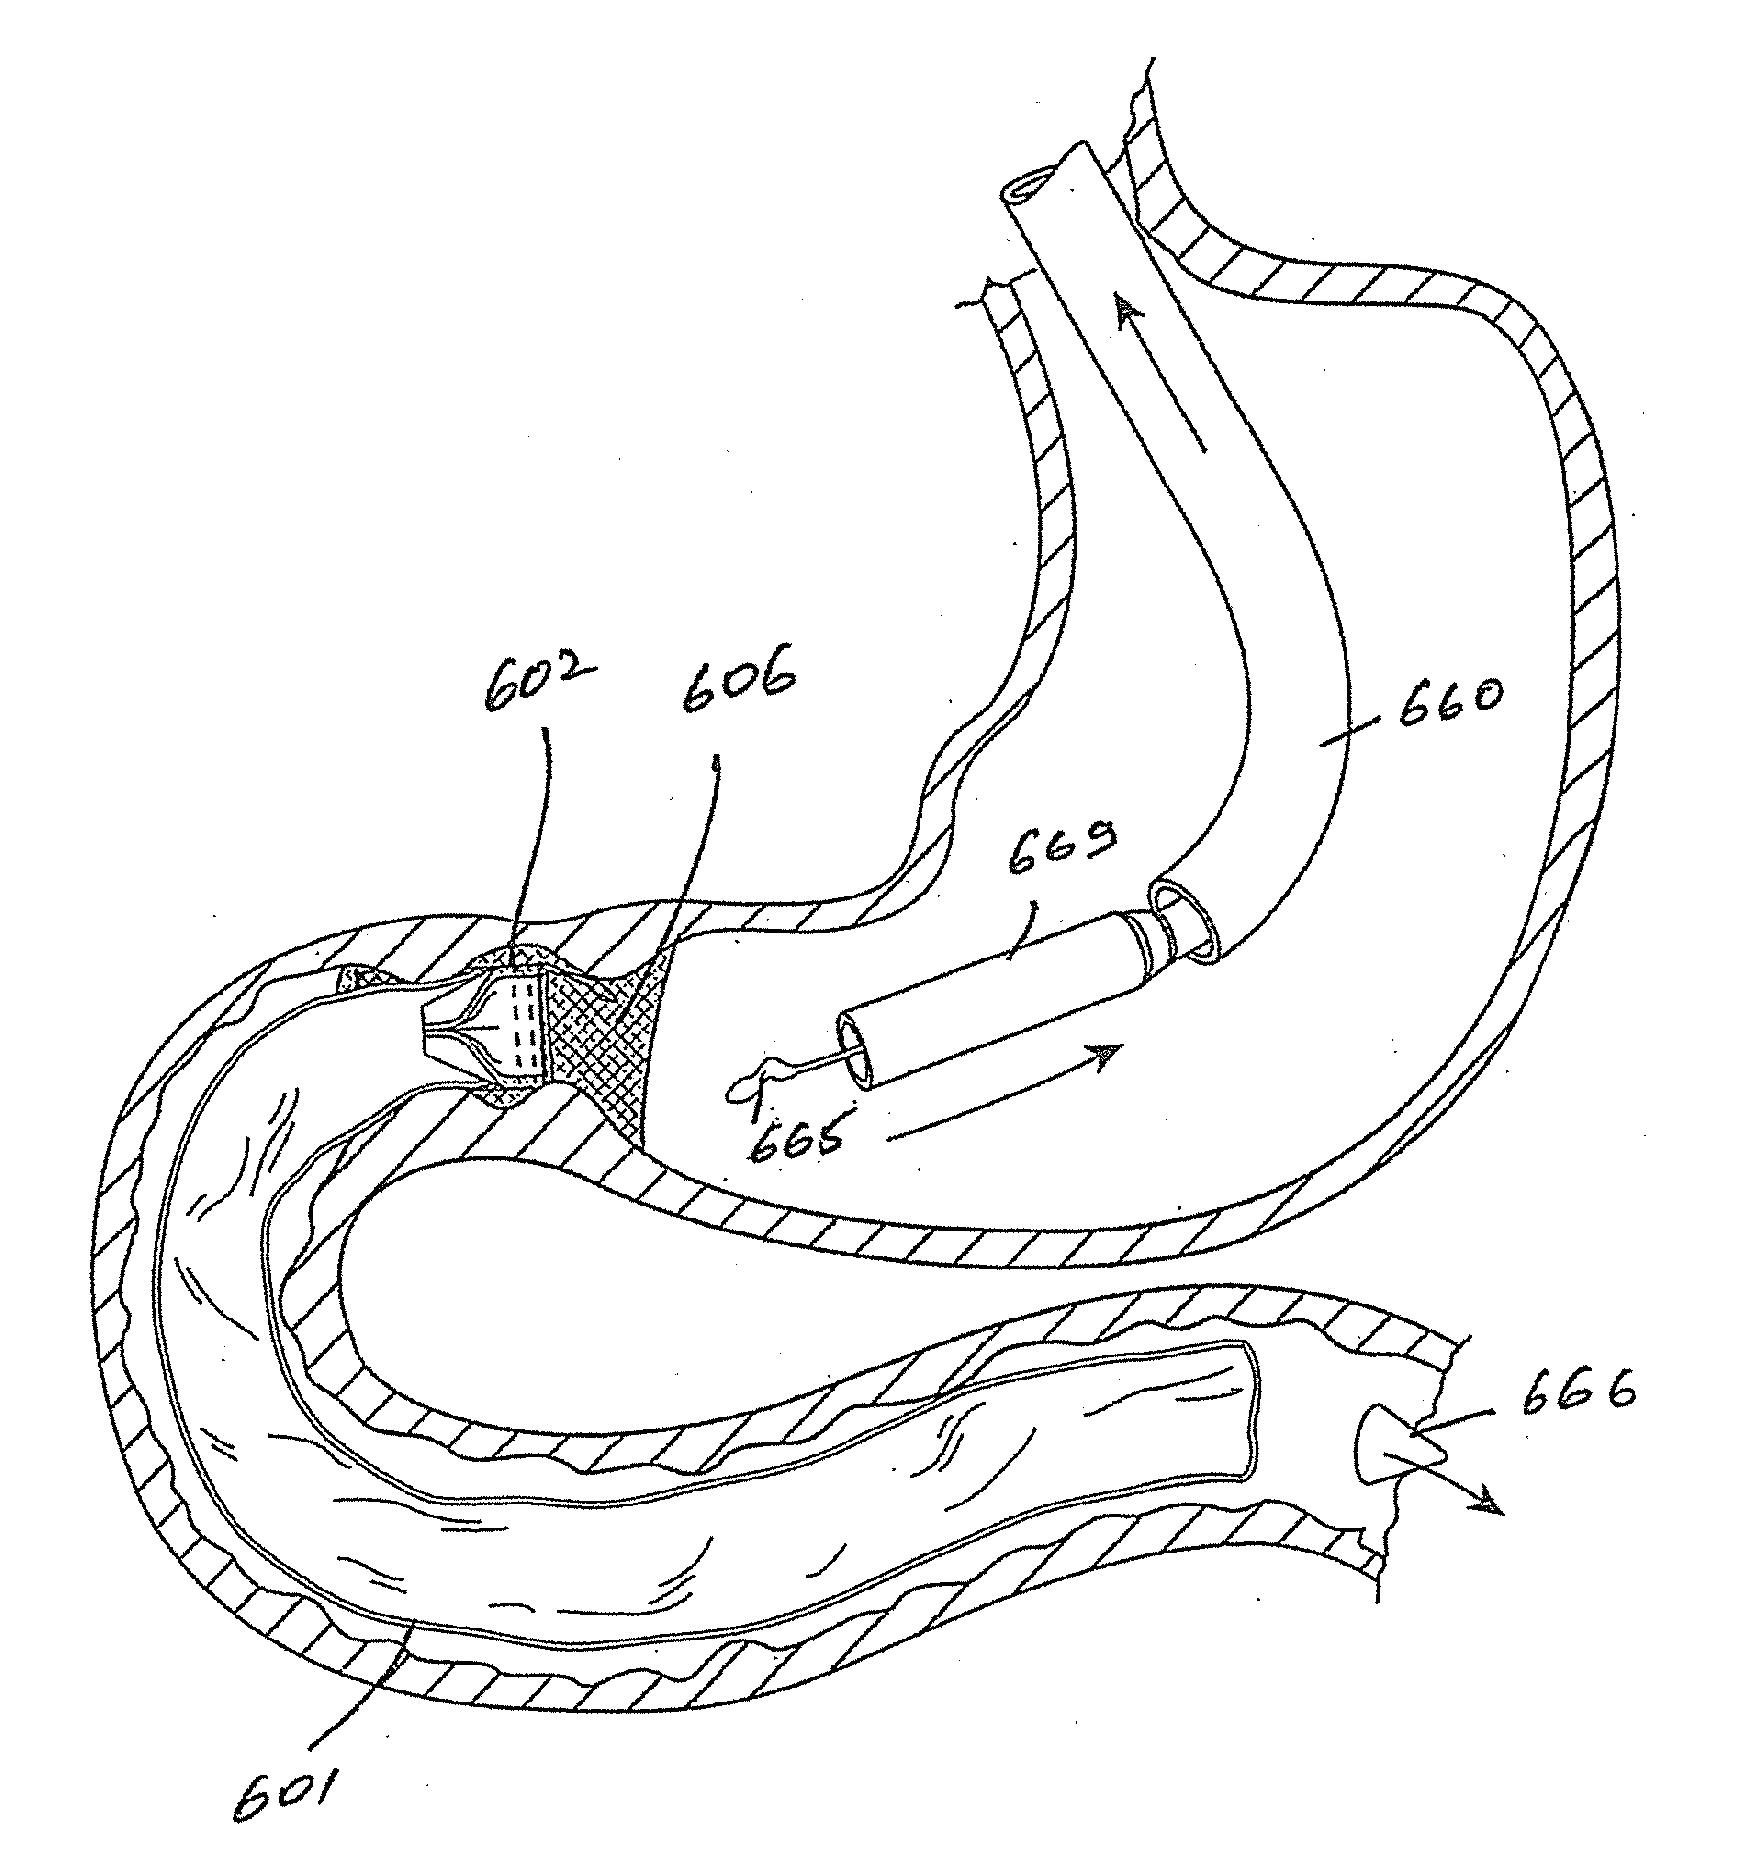 Luminal prosthesis and a gastrointestinal implant device